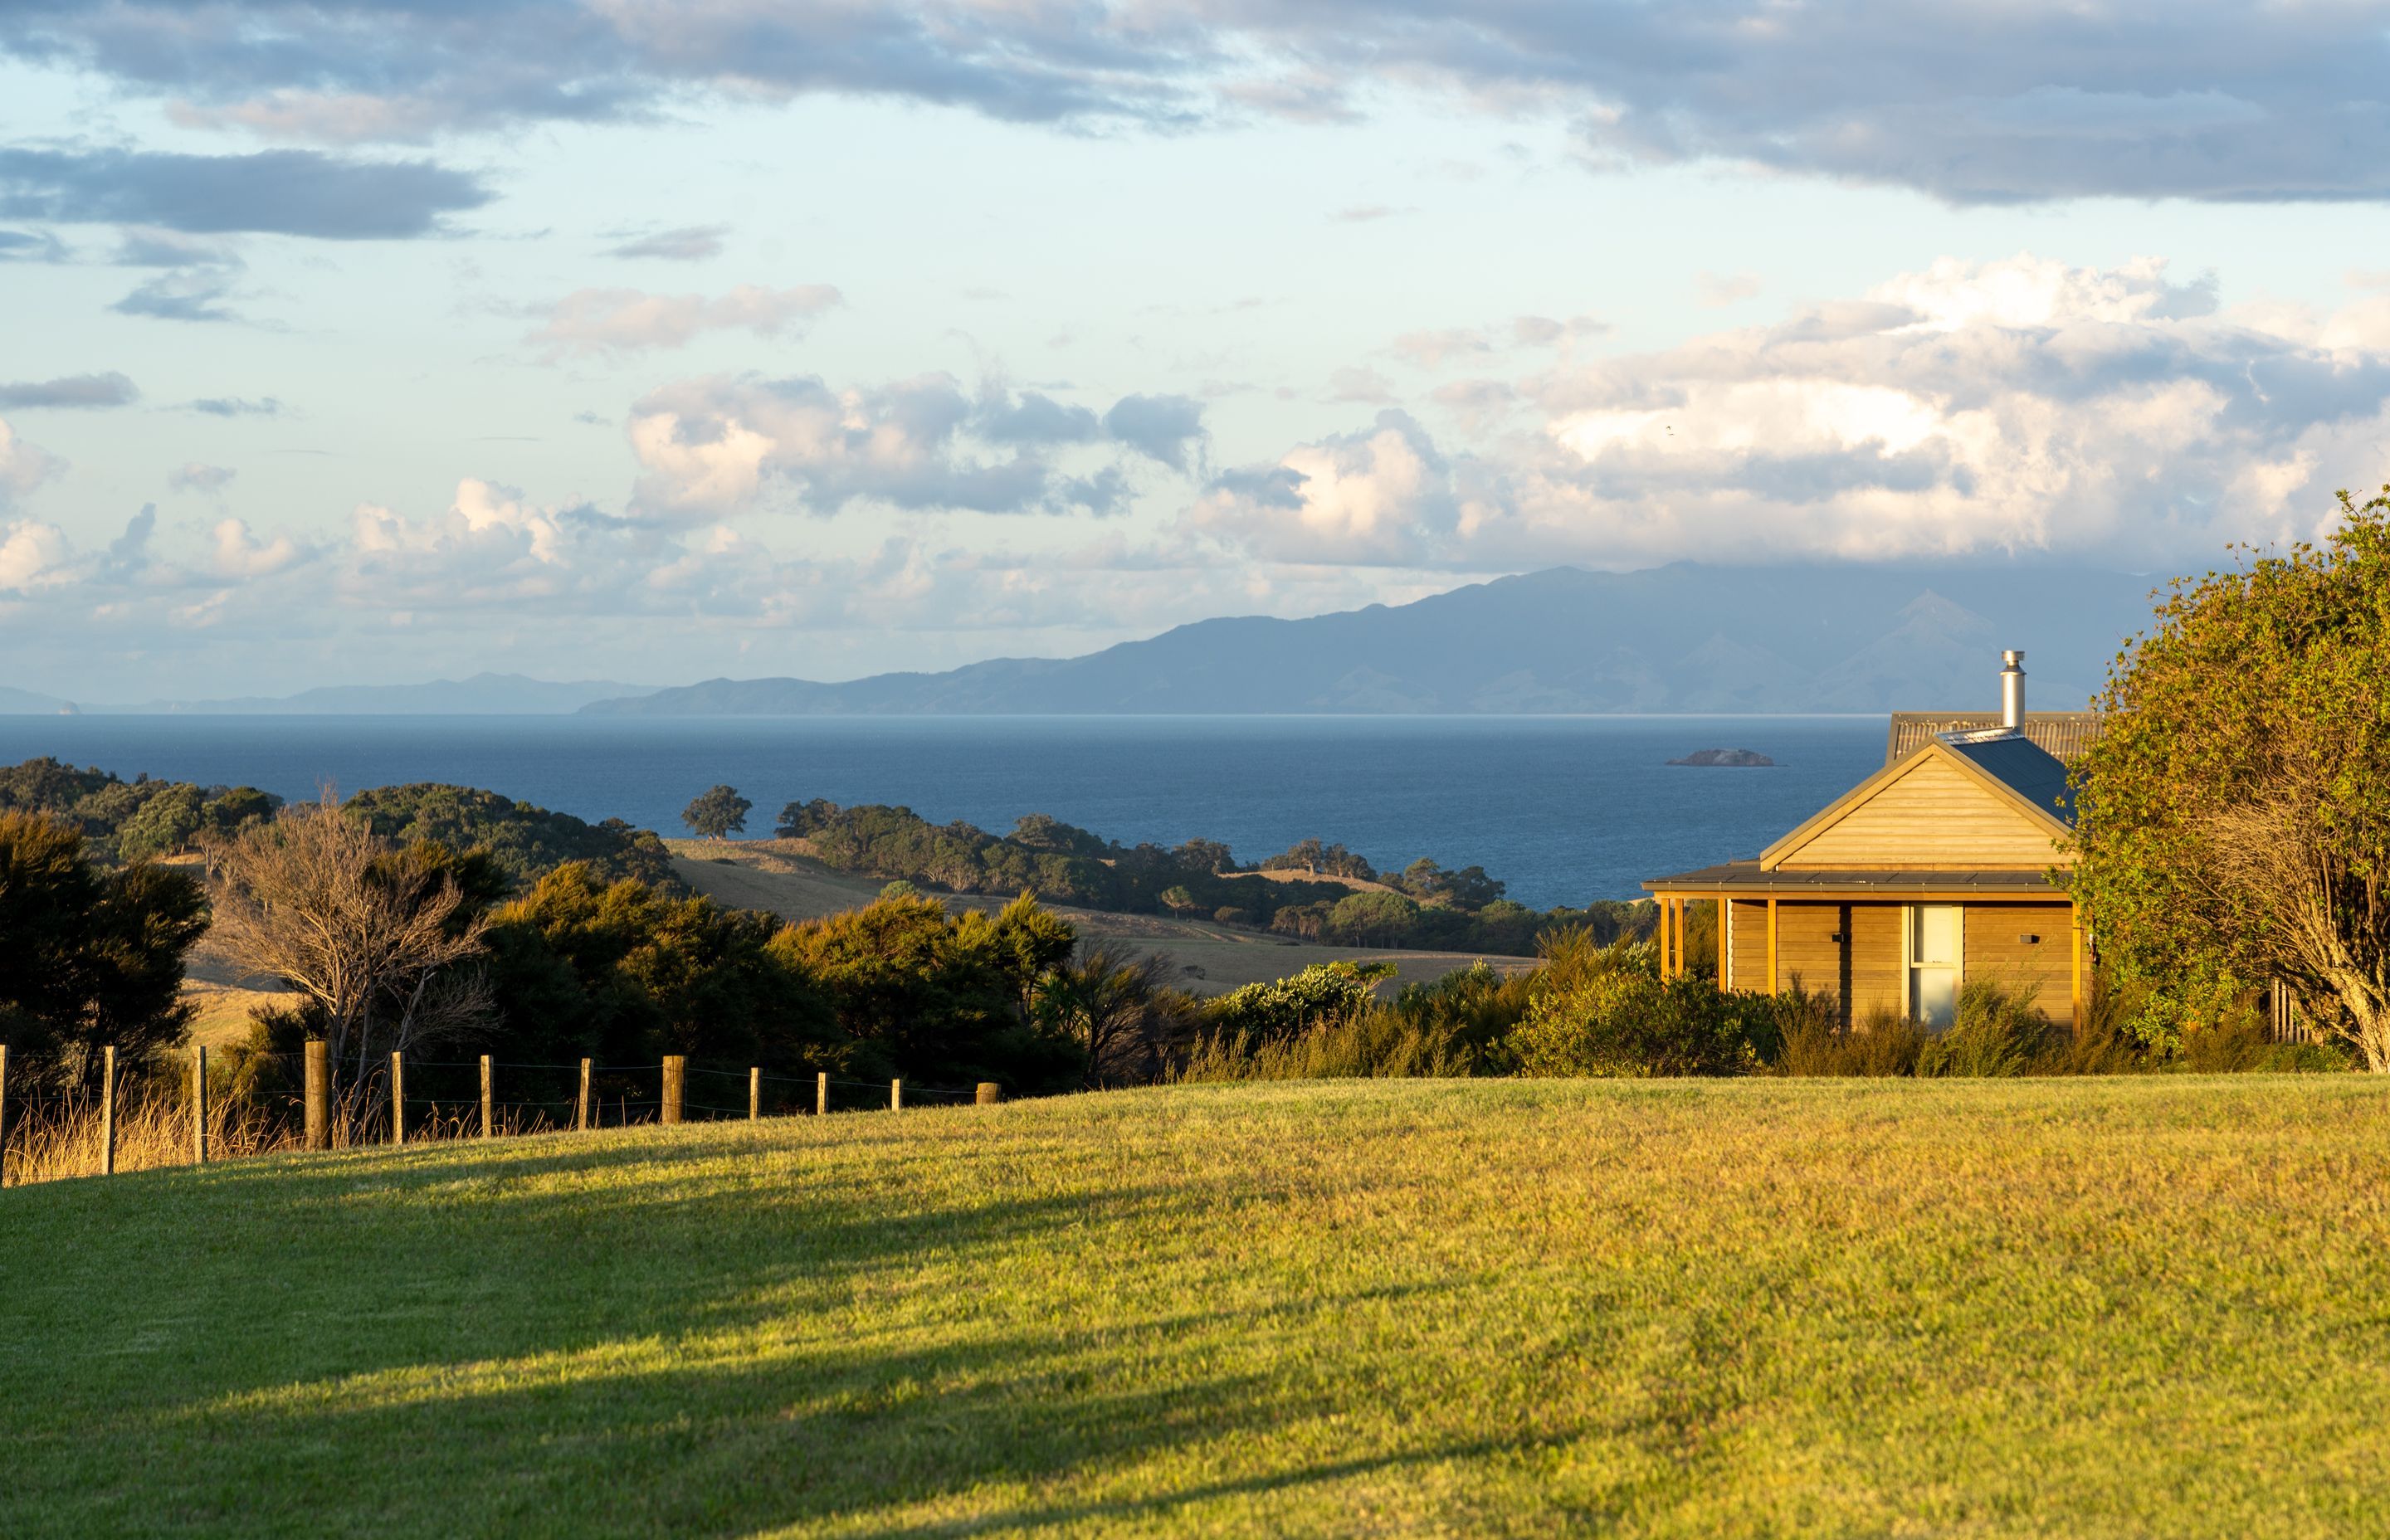 The work of Charissa, The Treehouse rests lightly on a tongue of land on Waiheke Island. Reminiscent of a tramper’s hut, the house is a timeless haven connected closely to the elements.